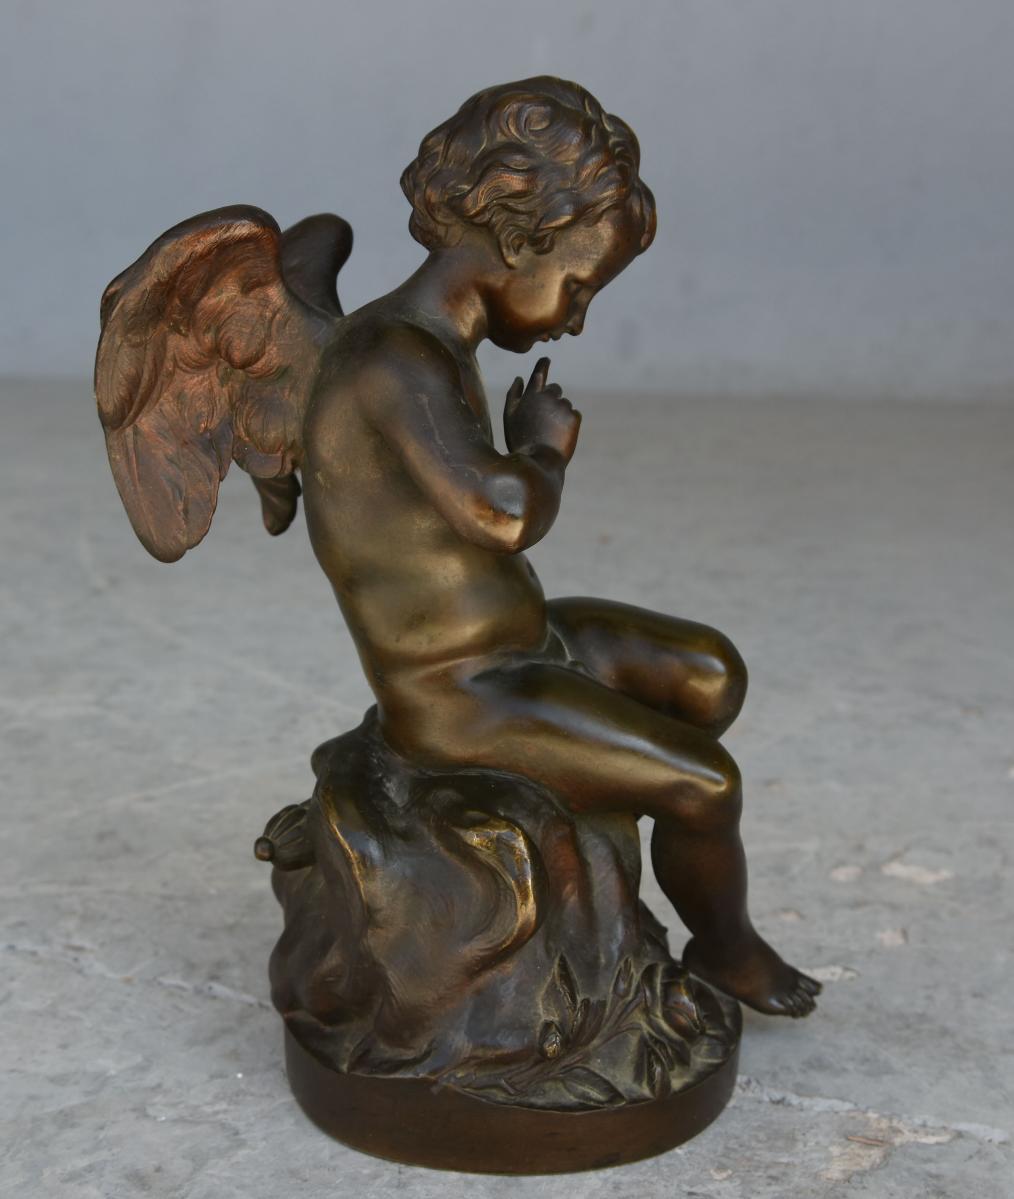 Late 19th century cupid bronze patinated gilded dimension: 27 cm high by 15 cm by 12 cm. Founder Richaud et Cie in Marseille. Model after Falconet.